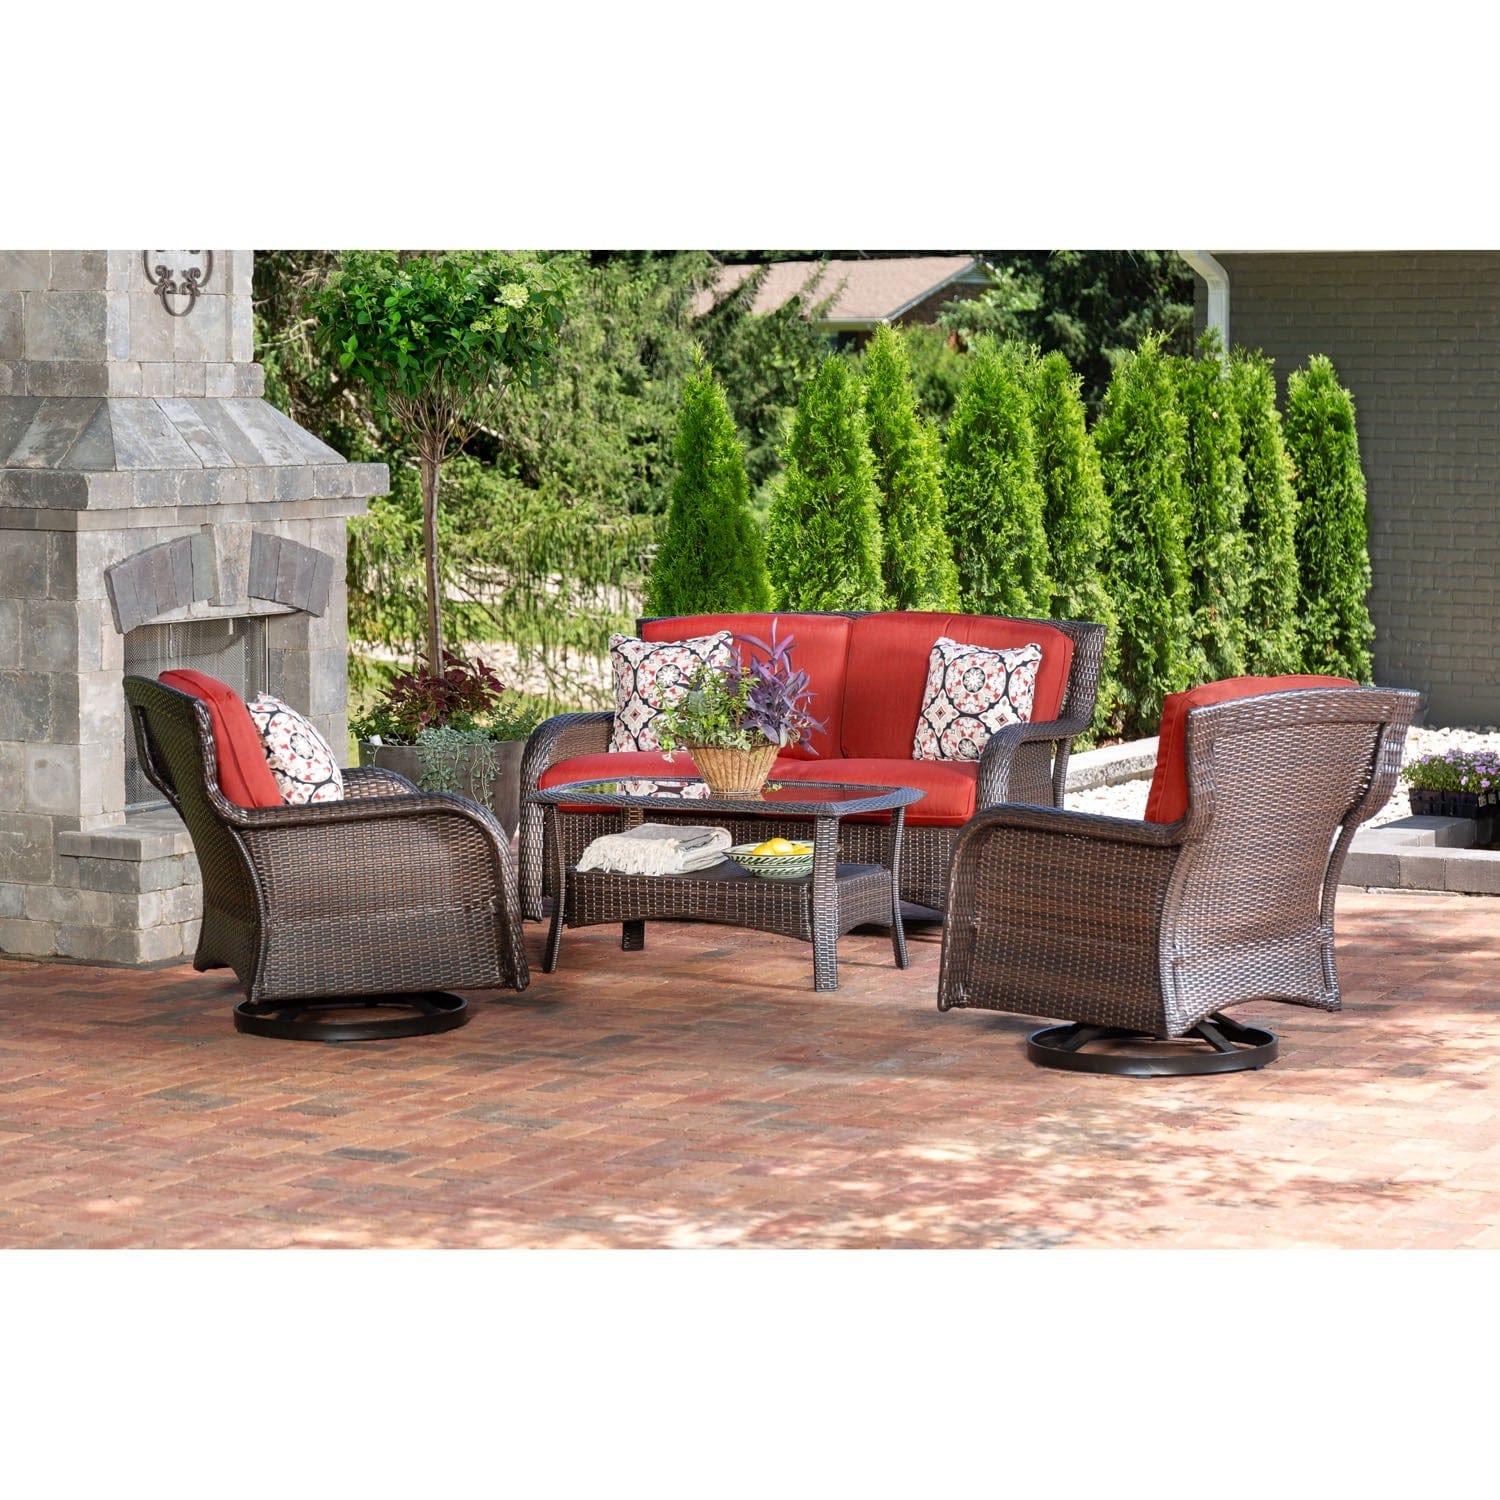 Hanover Conversation Set Hanover Strathmere 4-Piece Lounge Set in Crimson Red | Loveseat, 2 Swivel Gliders, Woven Coffee Table | STRATH4PCSW-LS-RED